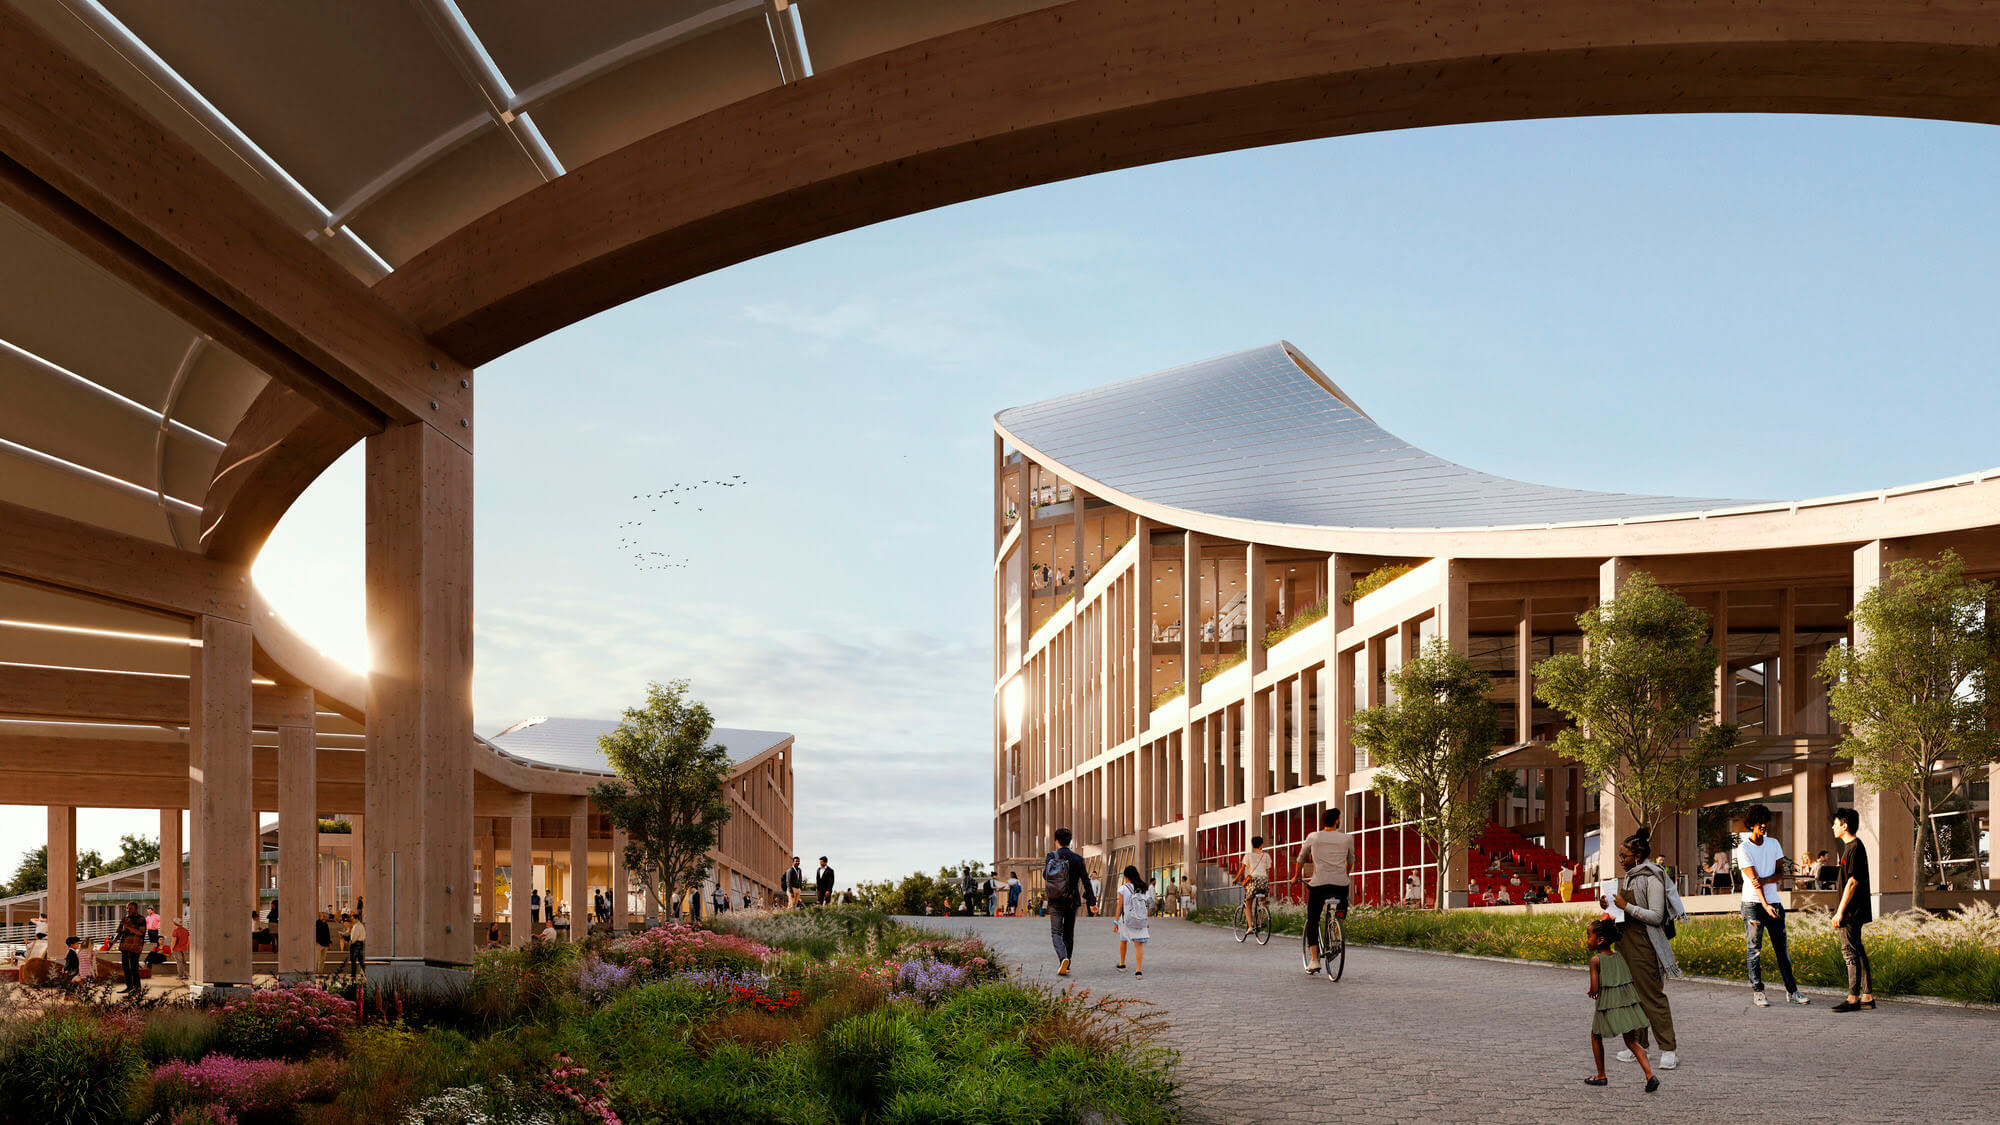 rendering of an academic campus